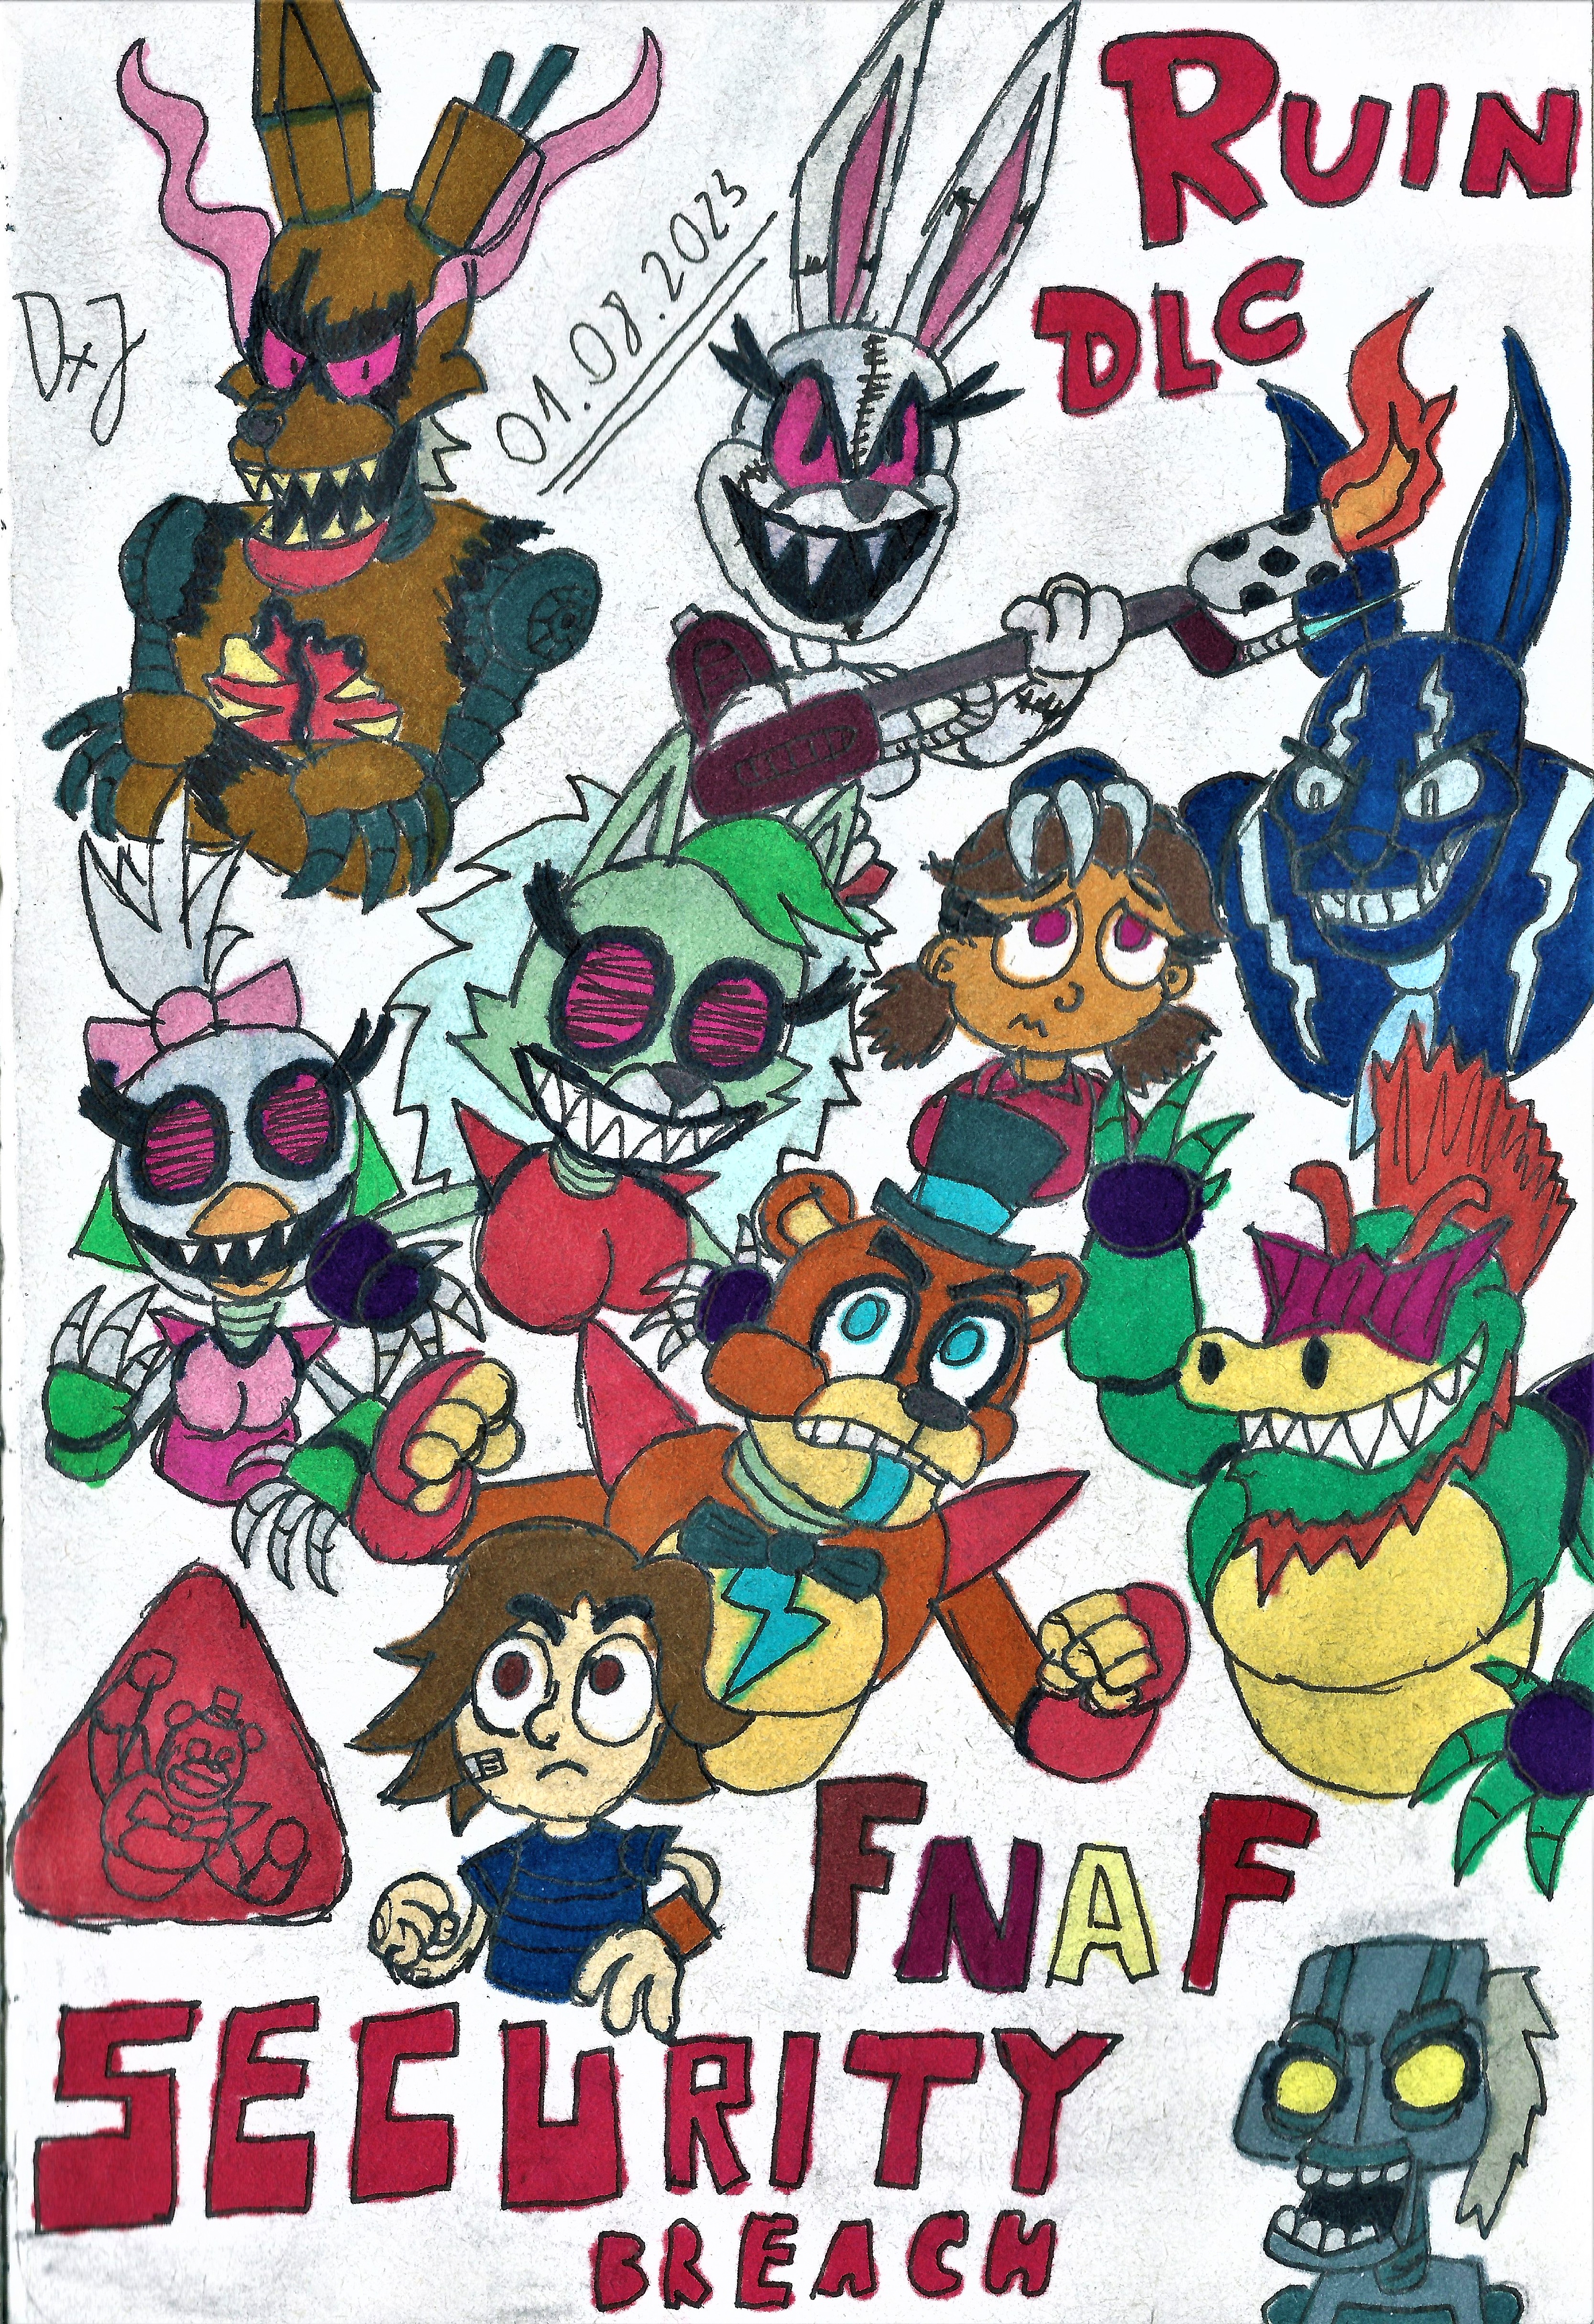 FNAF SB, Ruined: The Ruins by Corrupted-Ciphers on DeviantArt